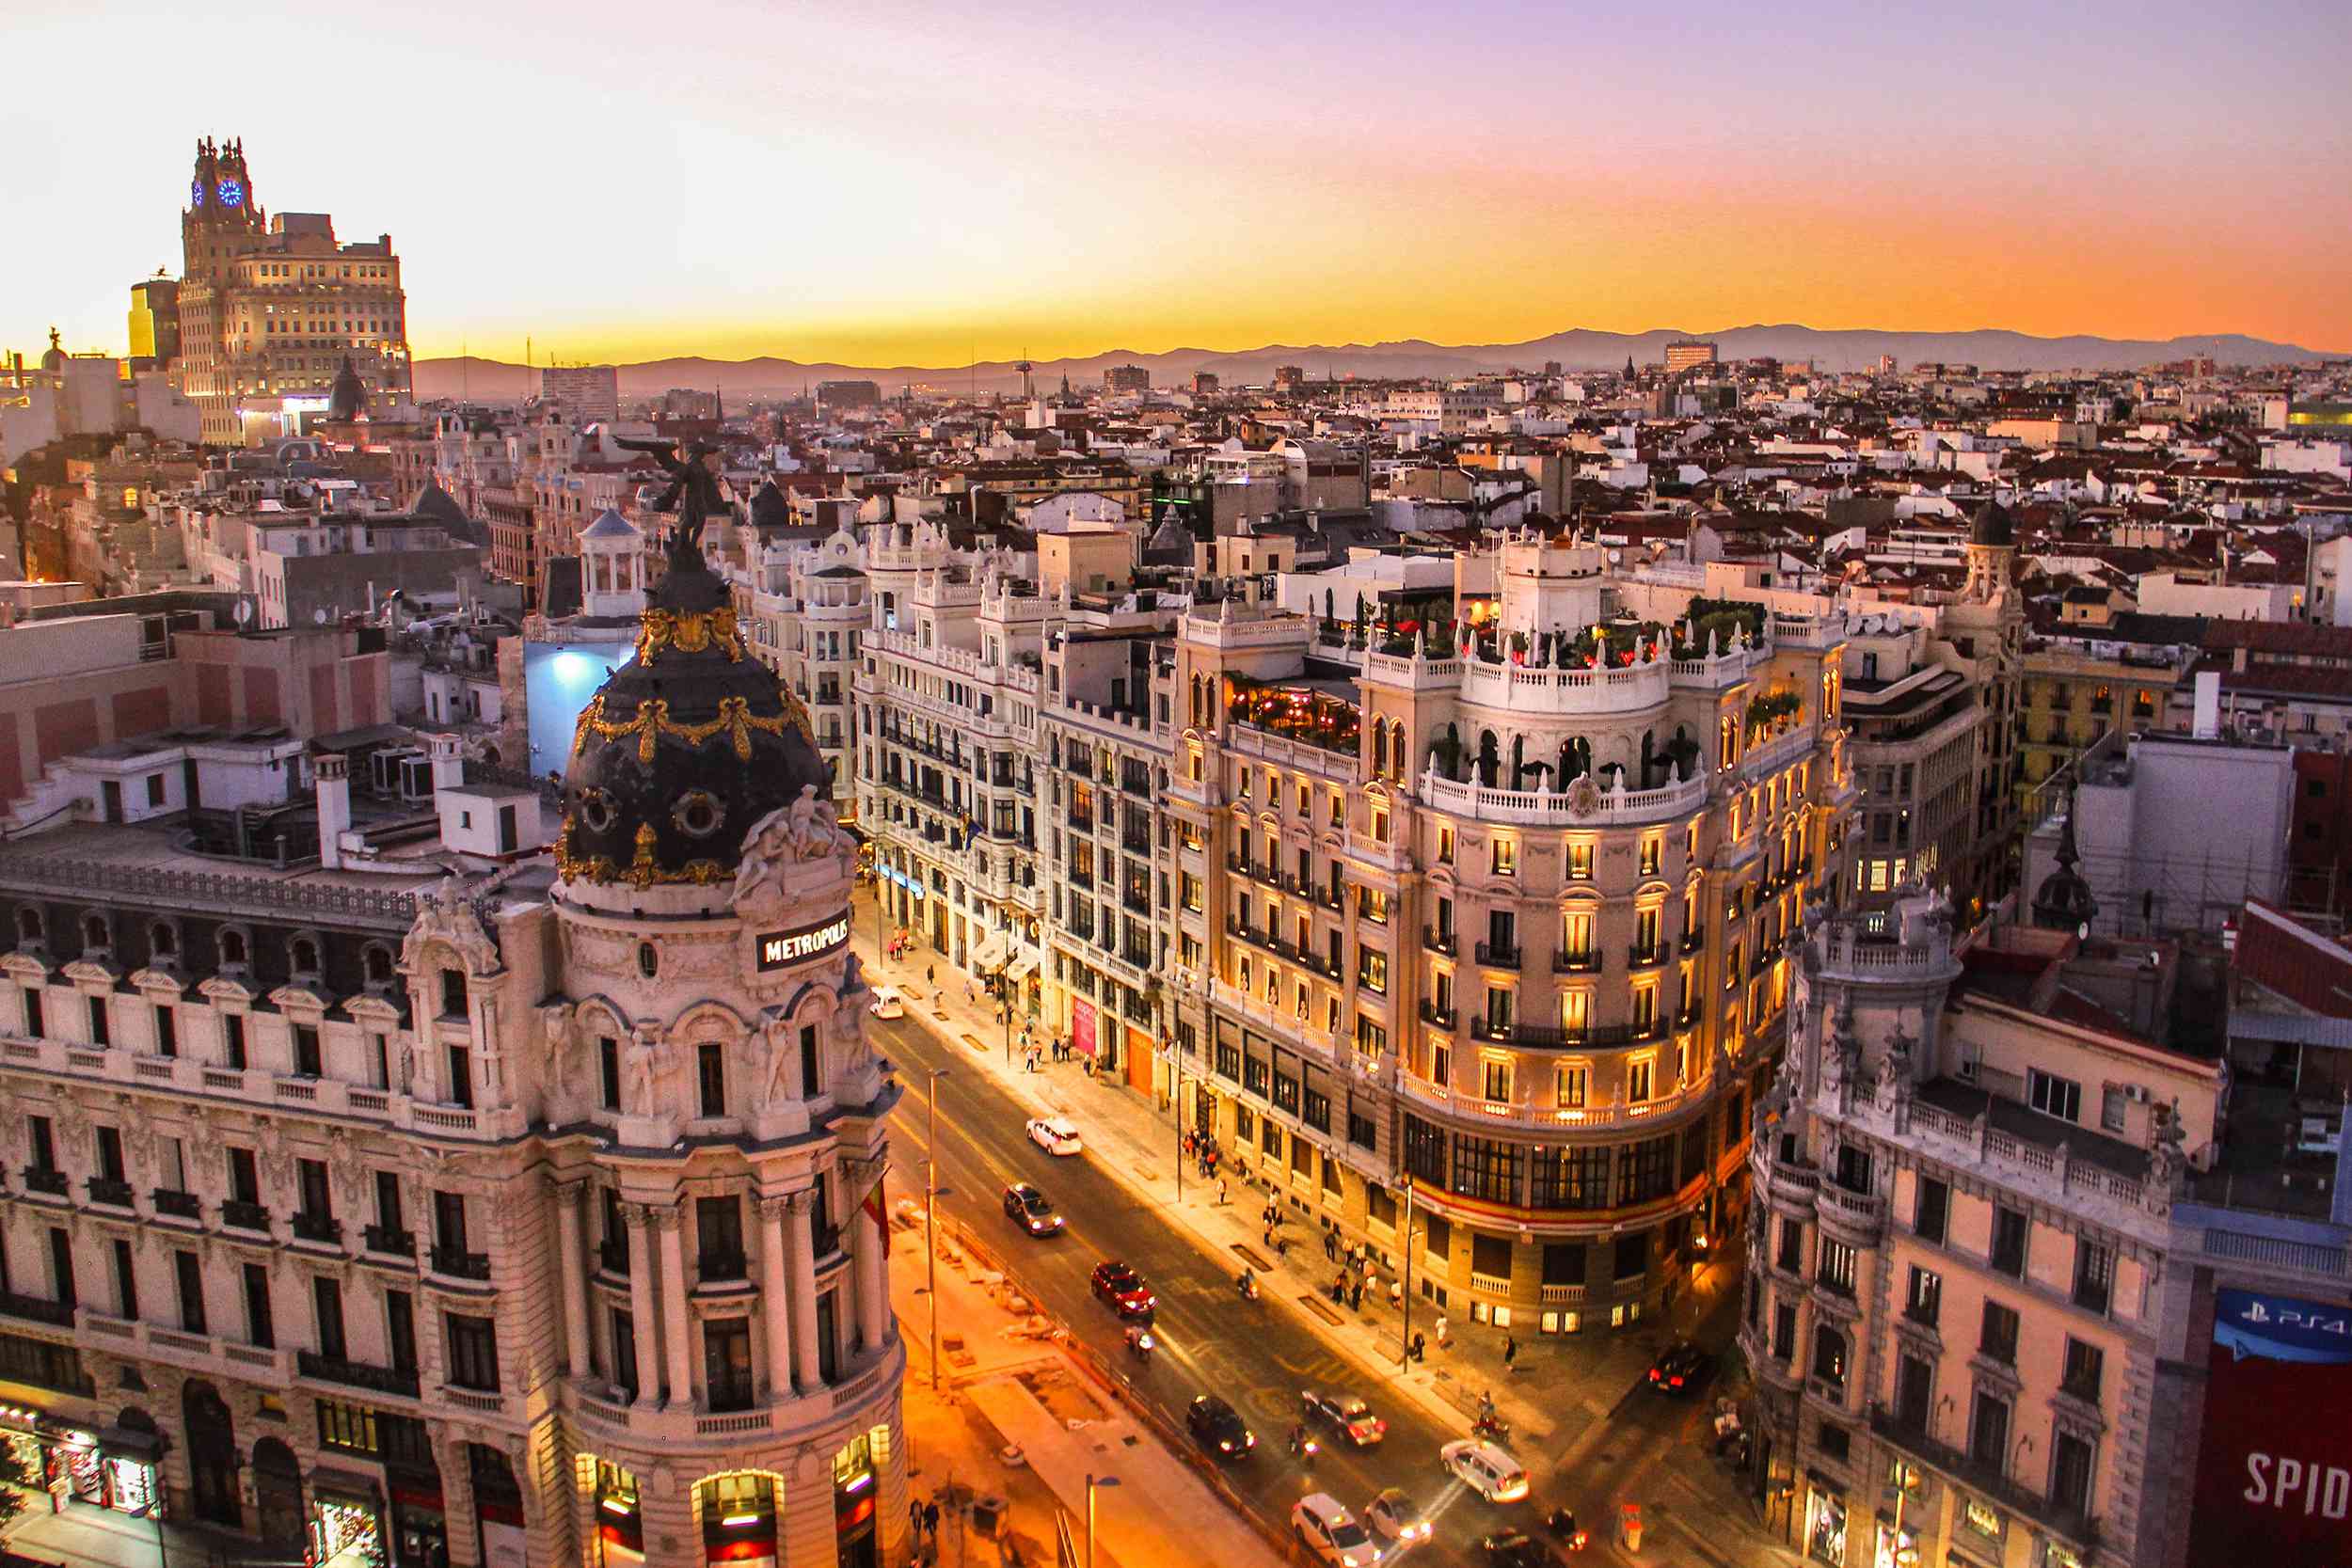 Is Madrid Tap Water Safe To Drink? Tap water & safety quality